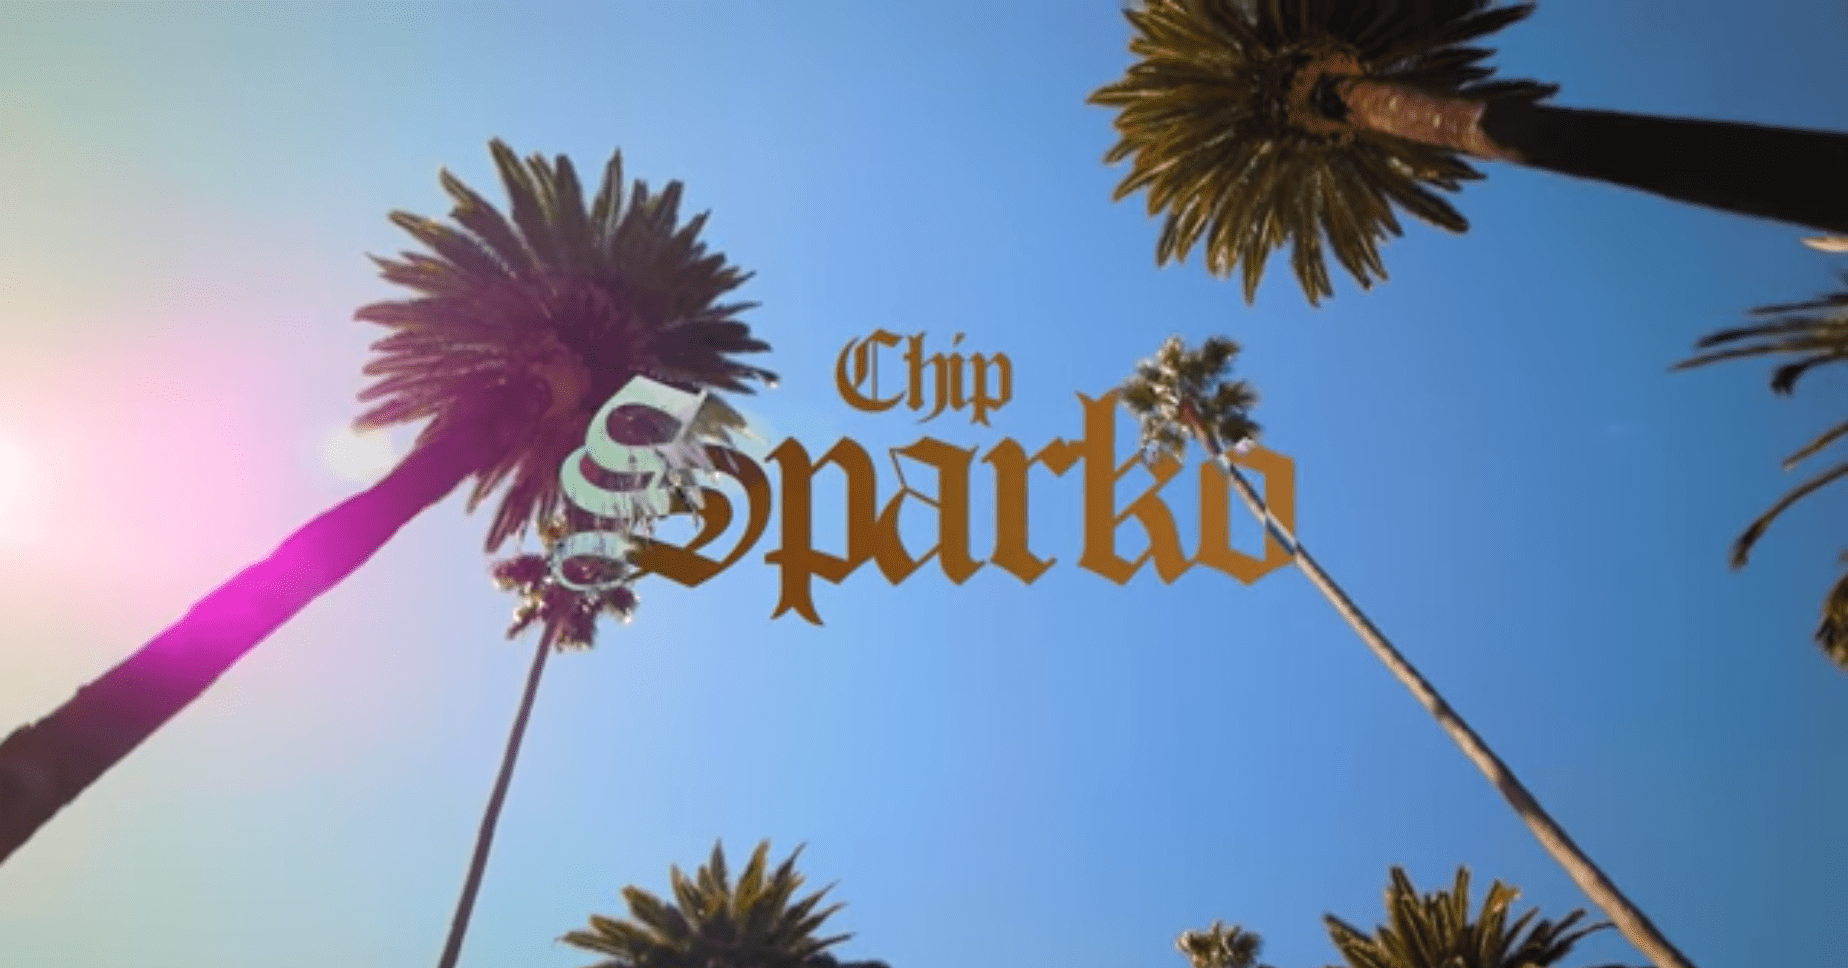 Chip Drops Birthday Joint 'Sparko'